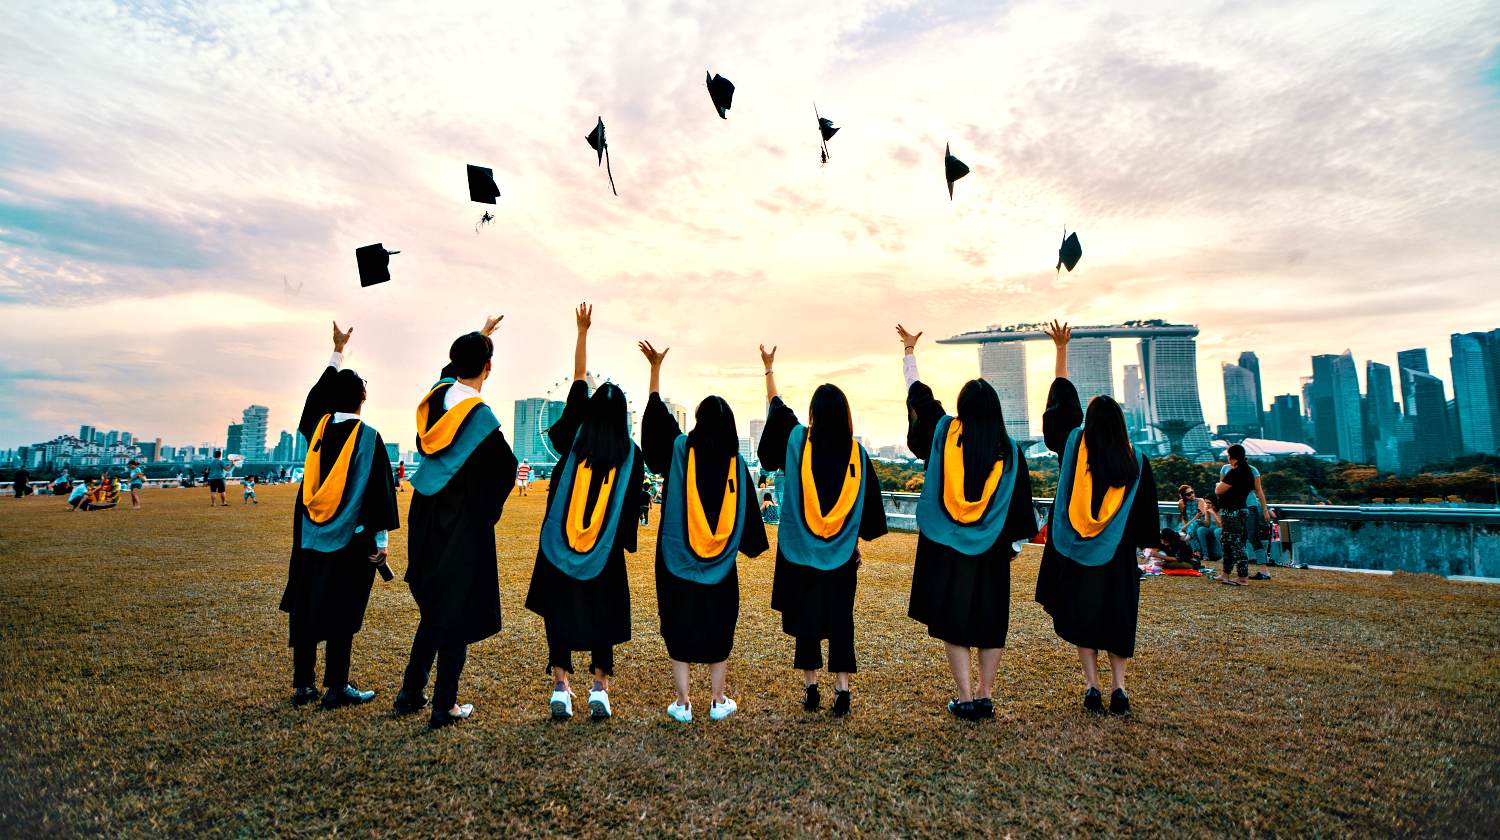 Feature | people throwing hats on air | Graduation Party Ideas To Celebrate The Big Day